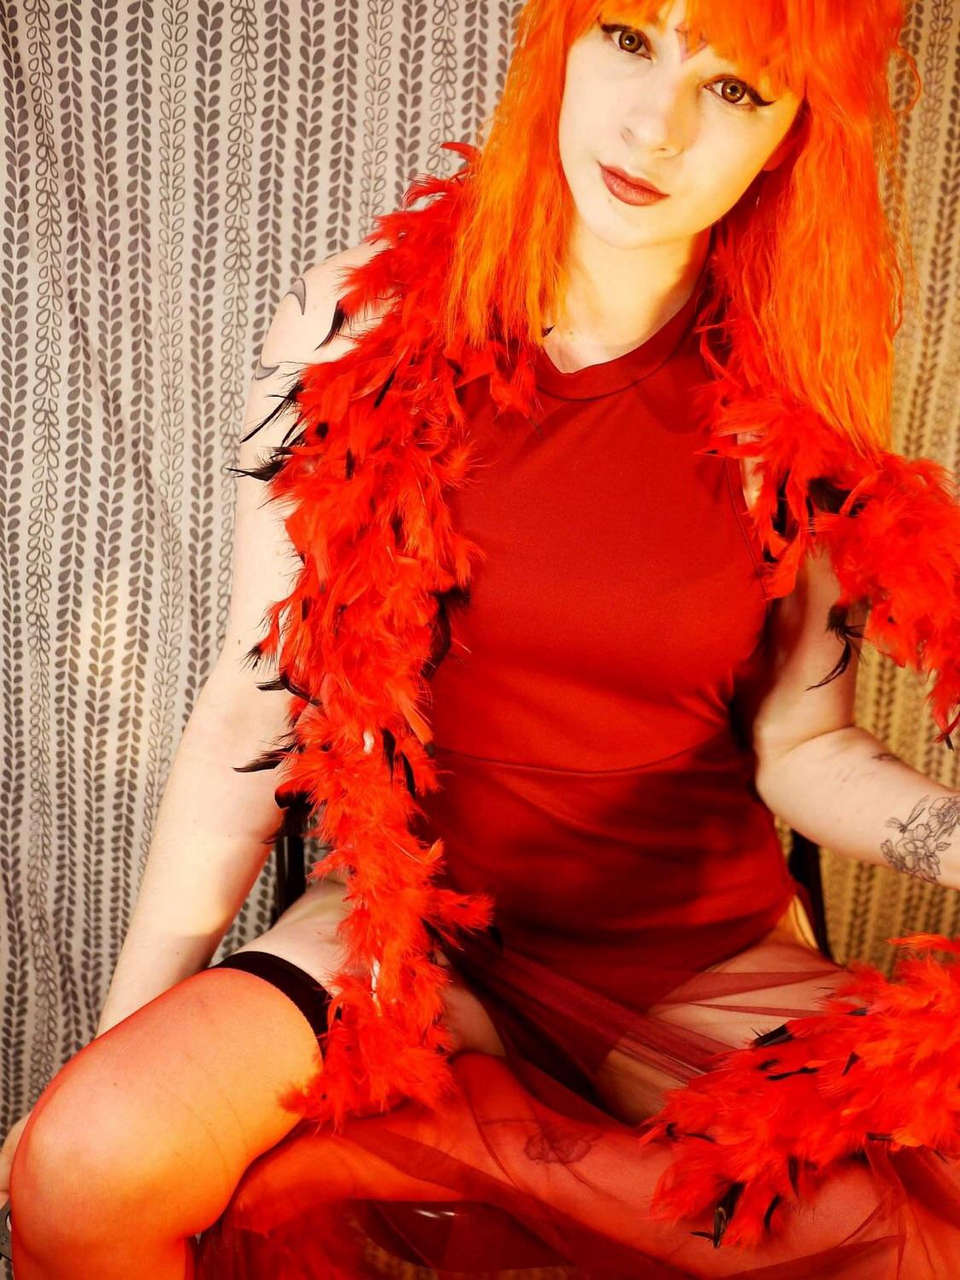 A Better Quality Picture Of My Flame Princess Cosplay Self By Stella66